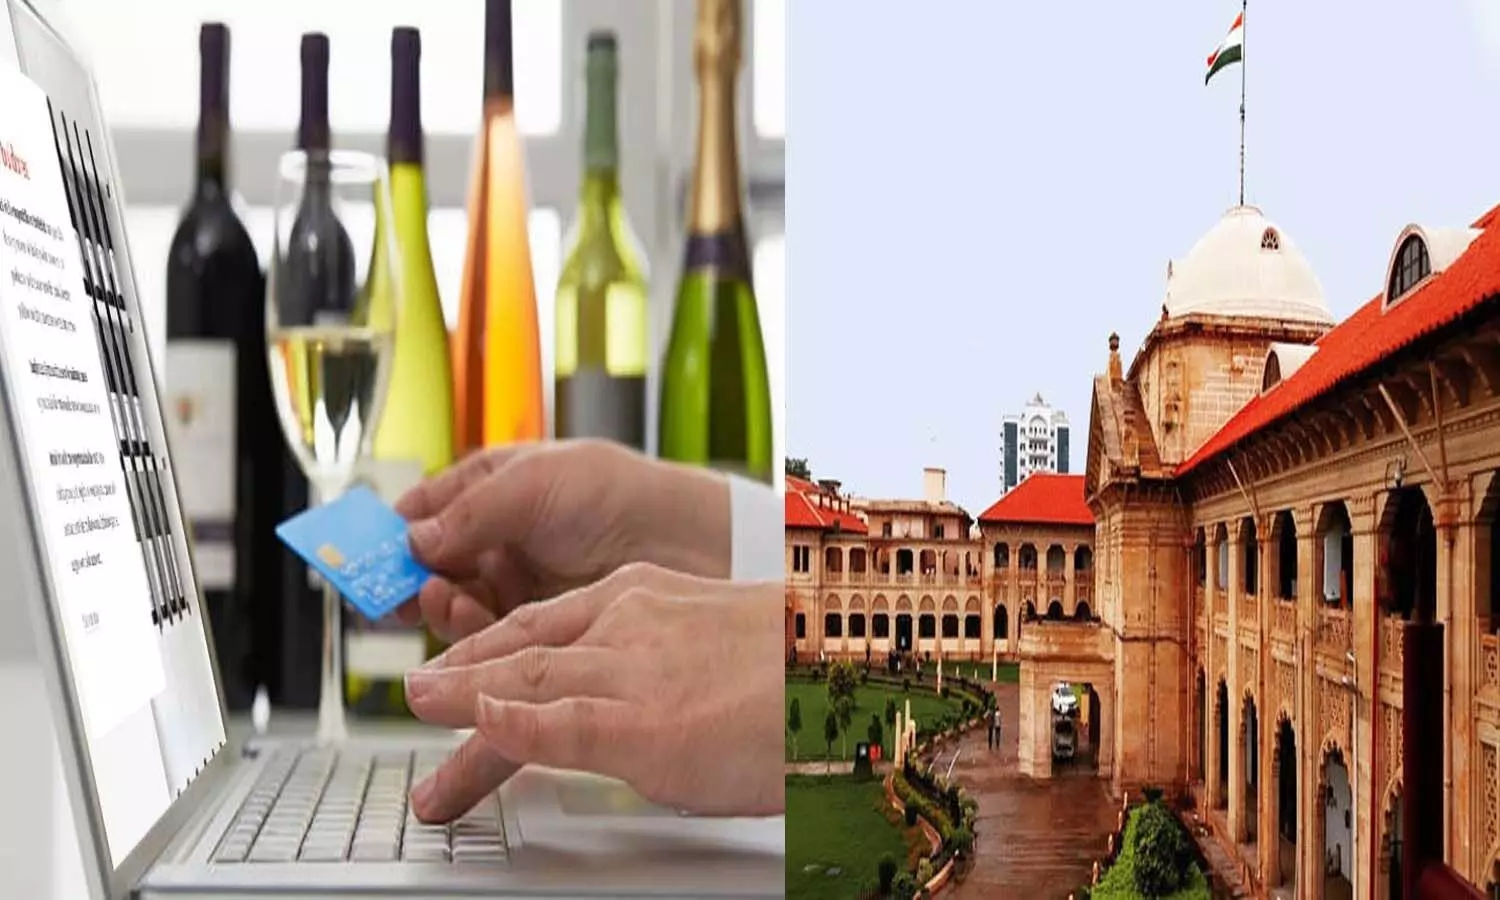 The Allahabad High Court has dismissed a PIL filed in Uttar Pradesh seeking permission for home delivery from online sale of liquor.